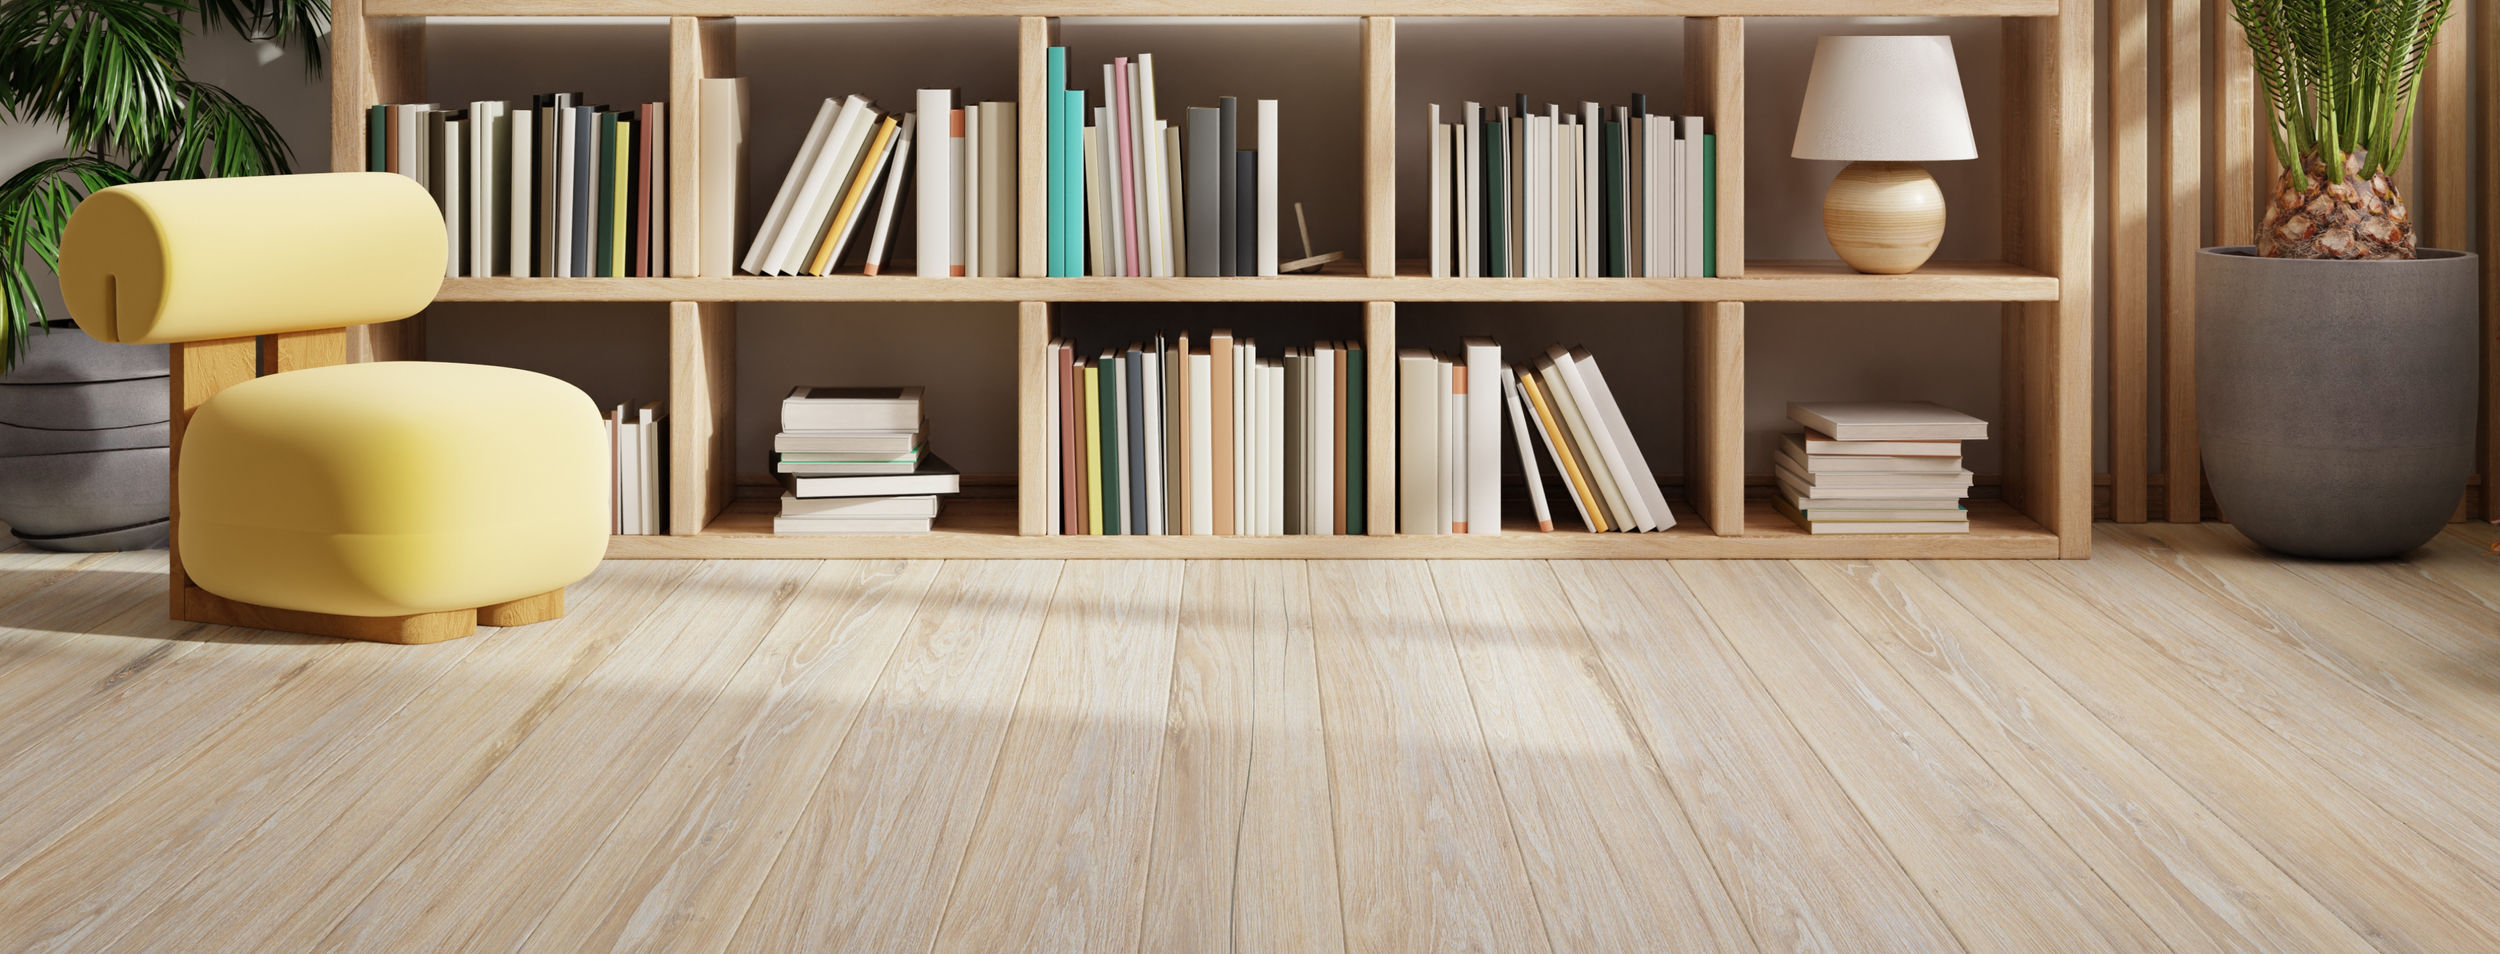 We believe that purchasing flooring materials should be accessible, simple and convenient.